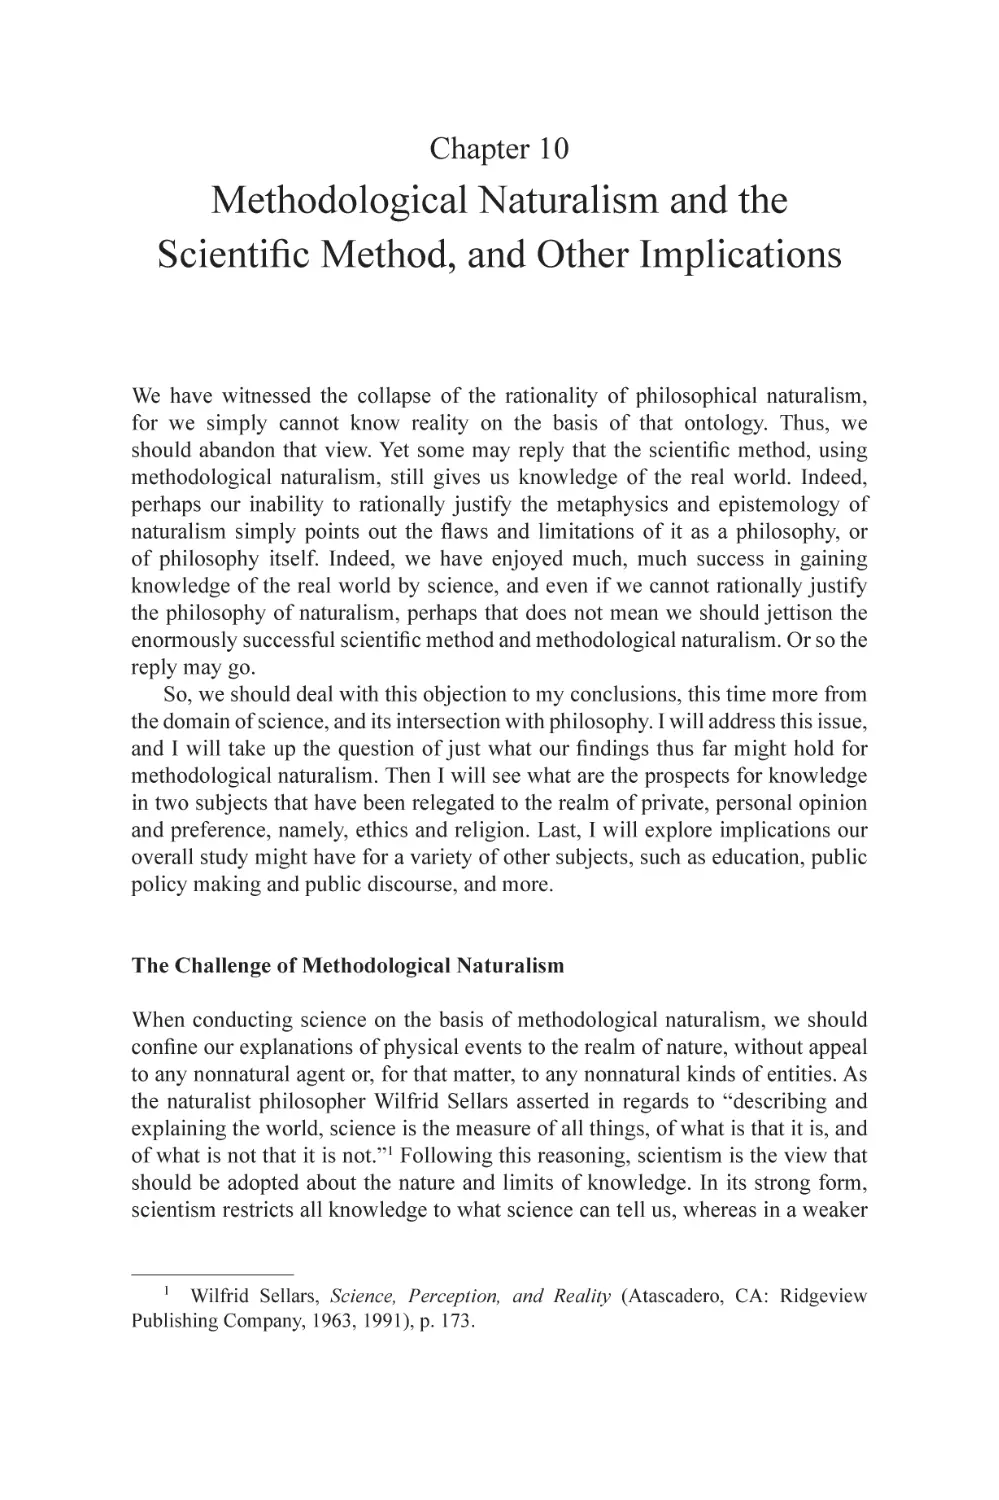 10 Methodological Naturalism and the Scientific Method, and Other Implications